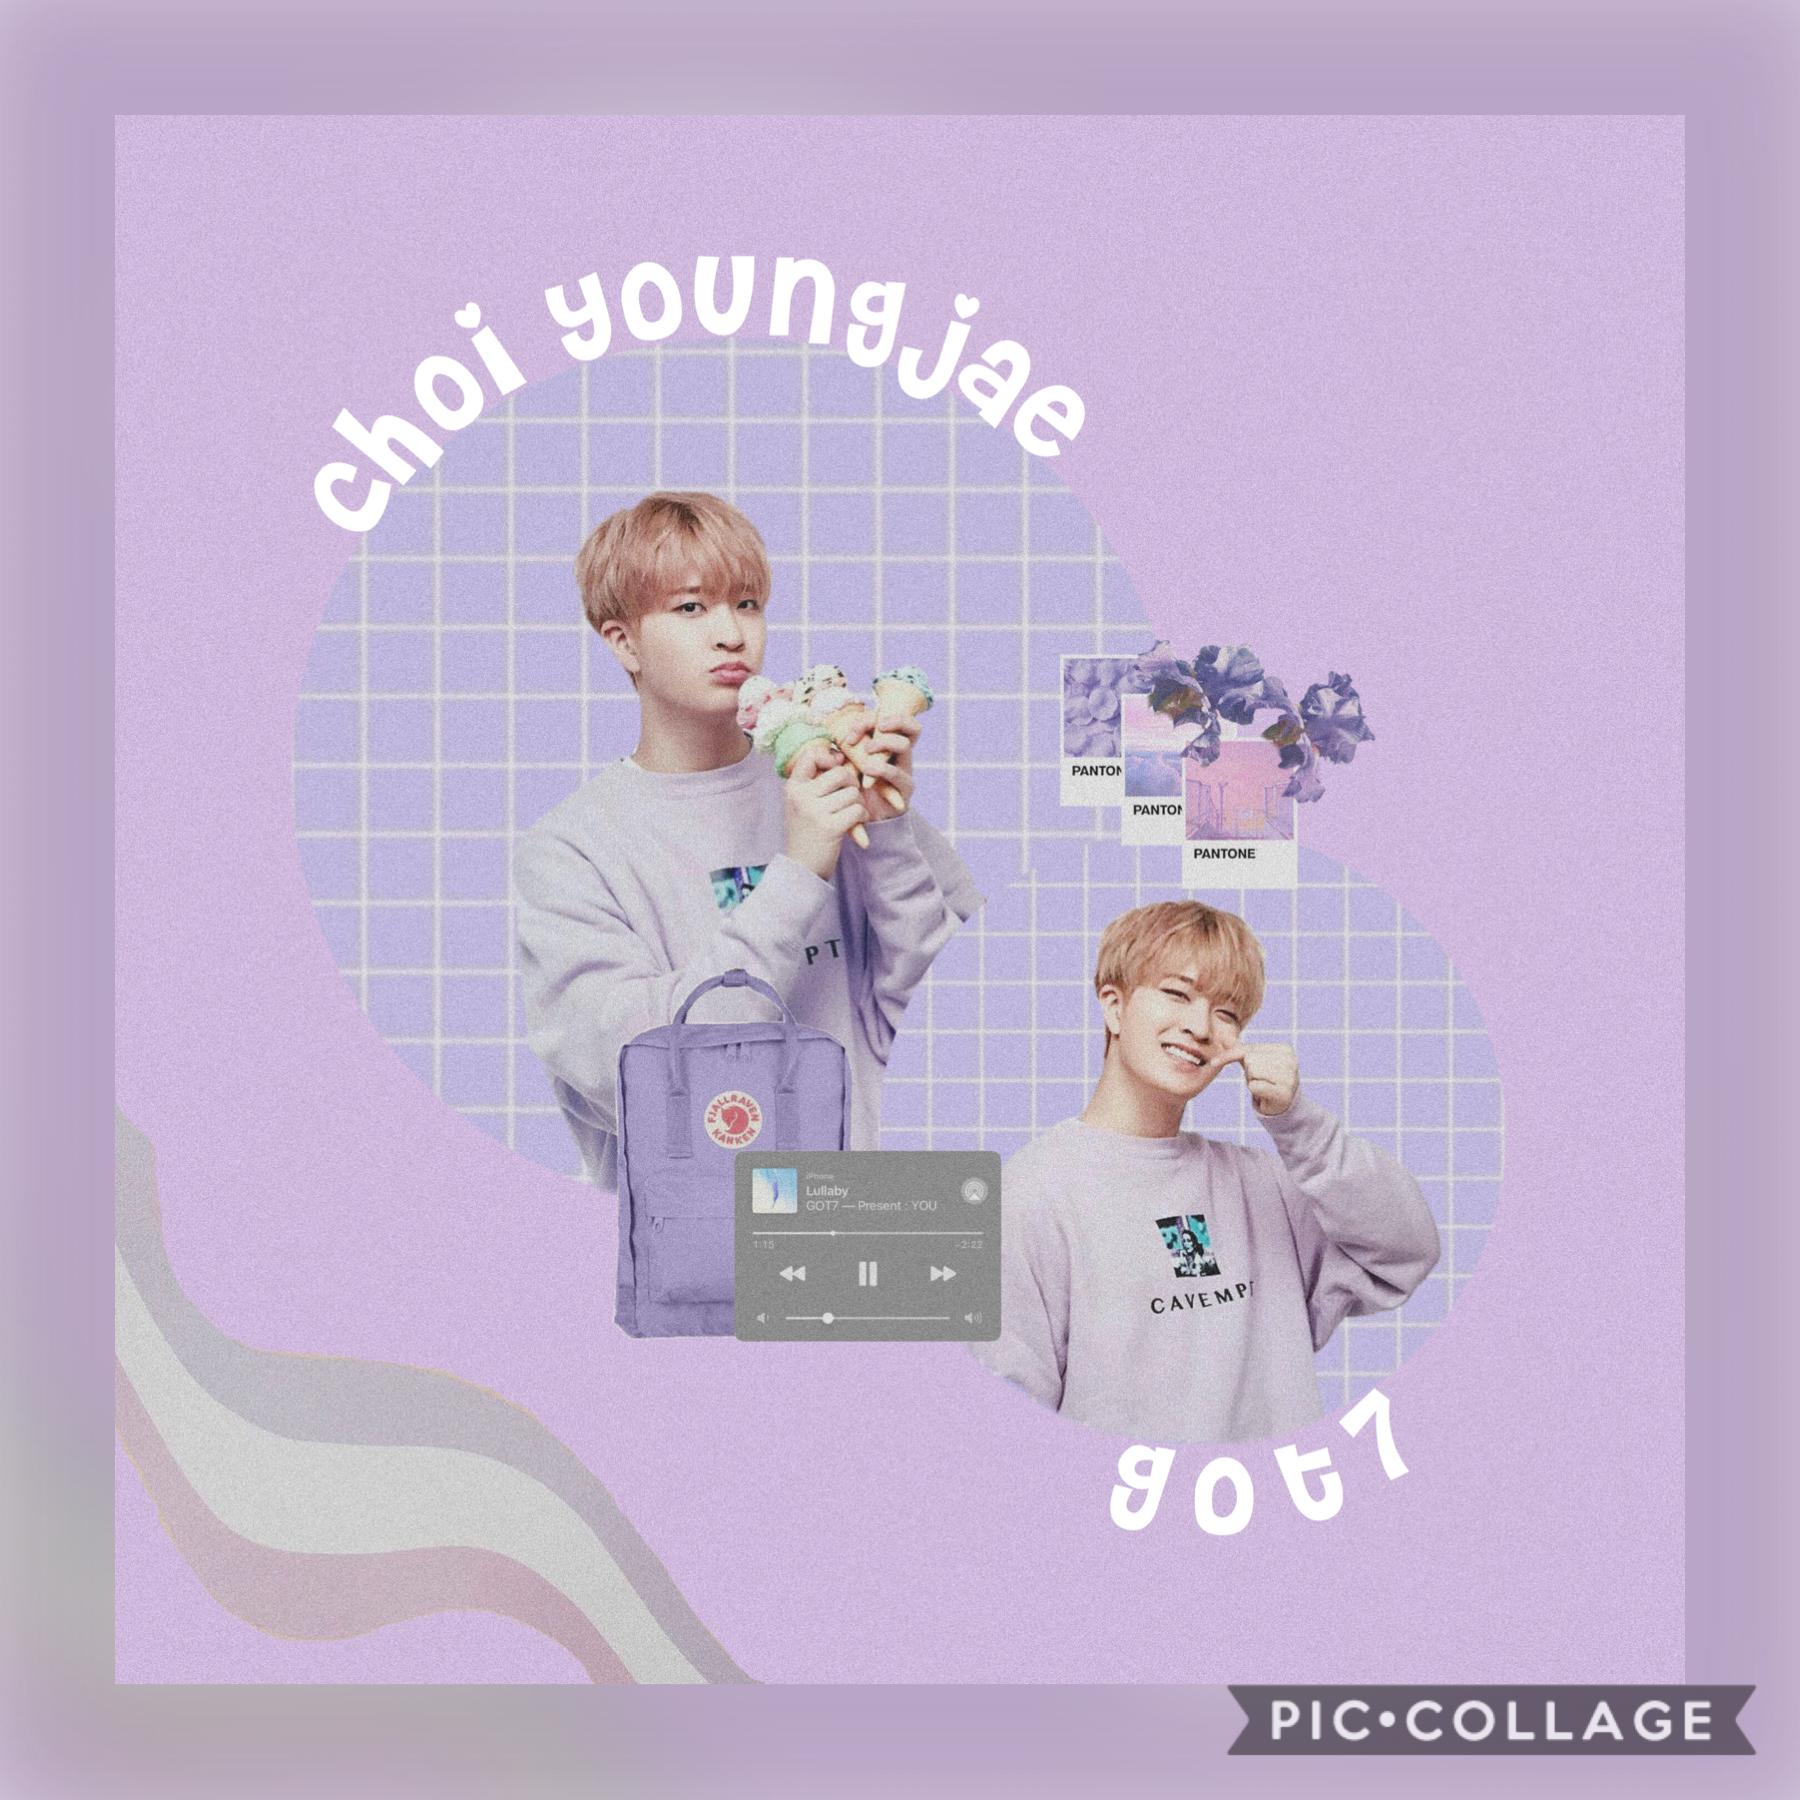 💜
youngjaeee🥺
I’ll try to post another collage later :))
hope y’all are doing well 💖